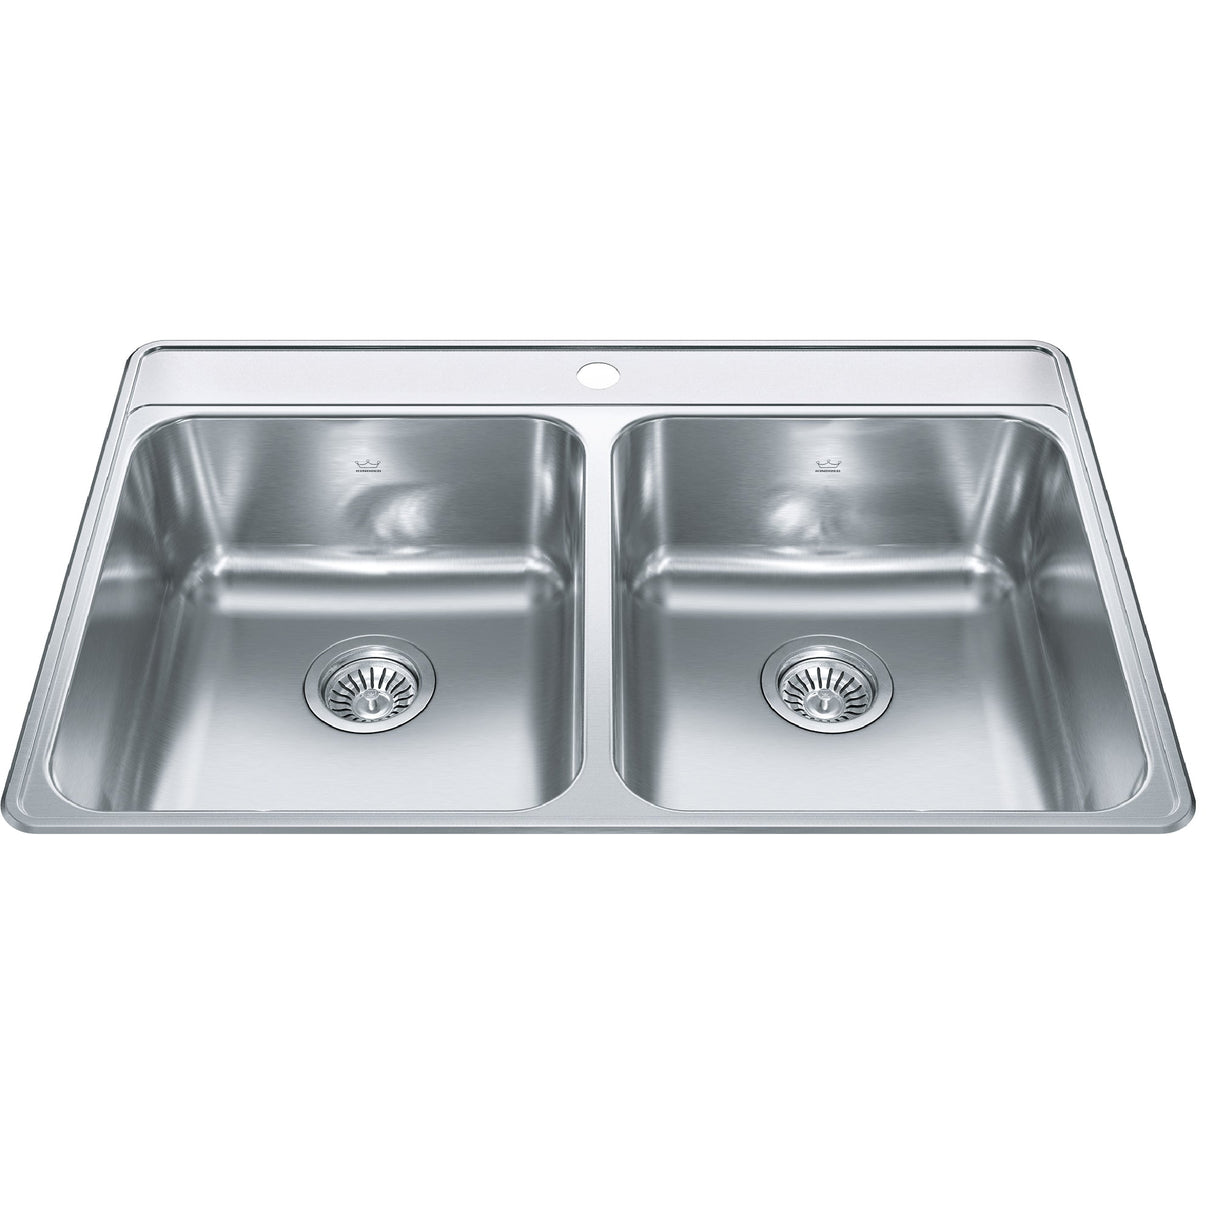 KINDRED CDLA3322-8-1CBN Creemore 33-in LR x 22-in FB x 8-in DP Drop In Double Bowl 1-Hole Stainless Steel Kitchen Sink In Commercial Satin Finish